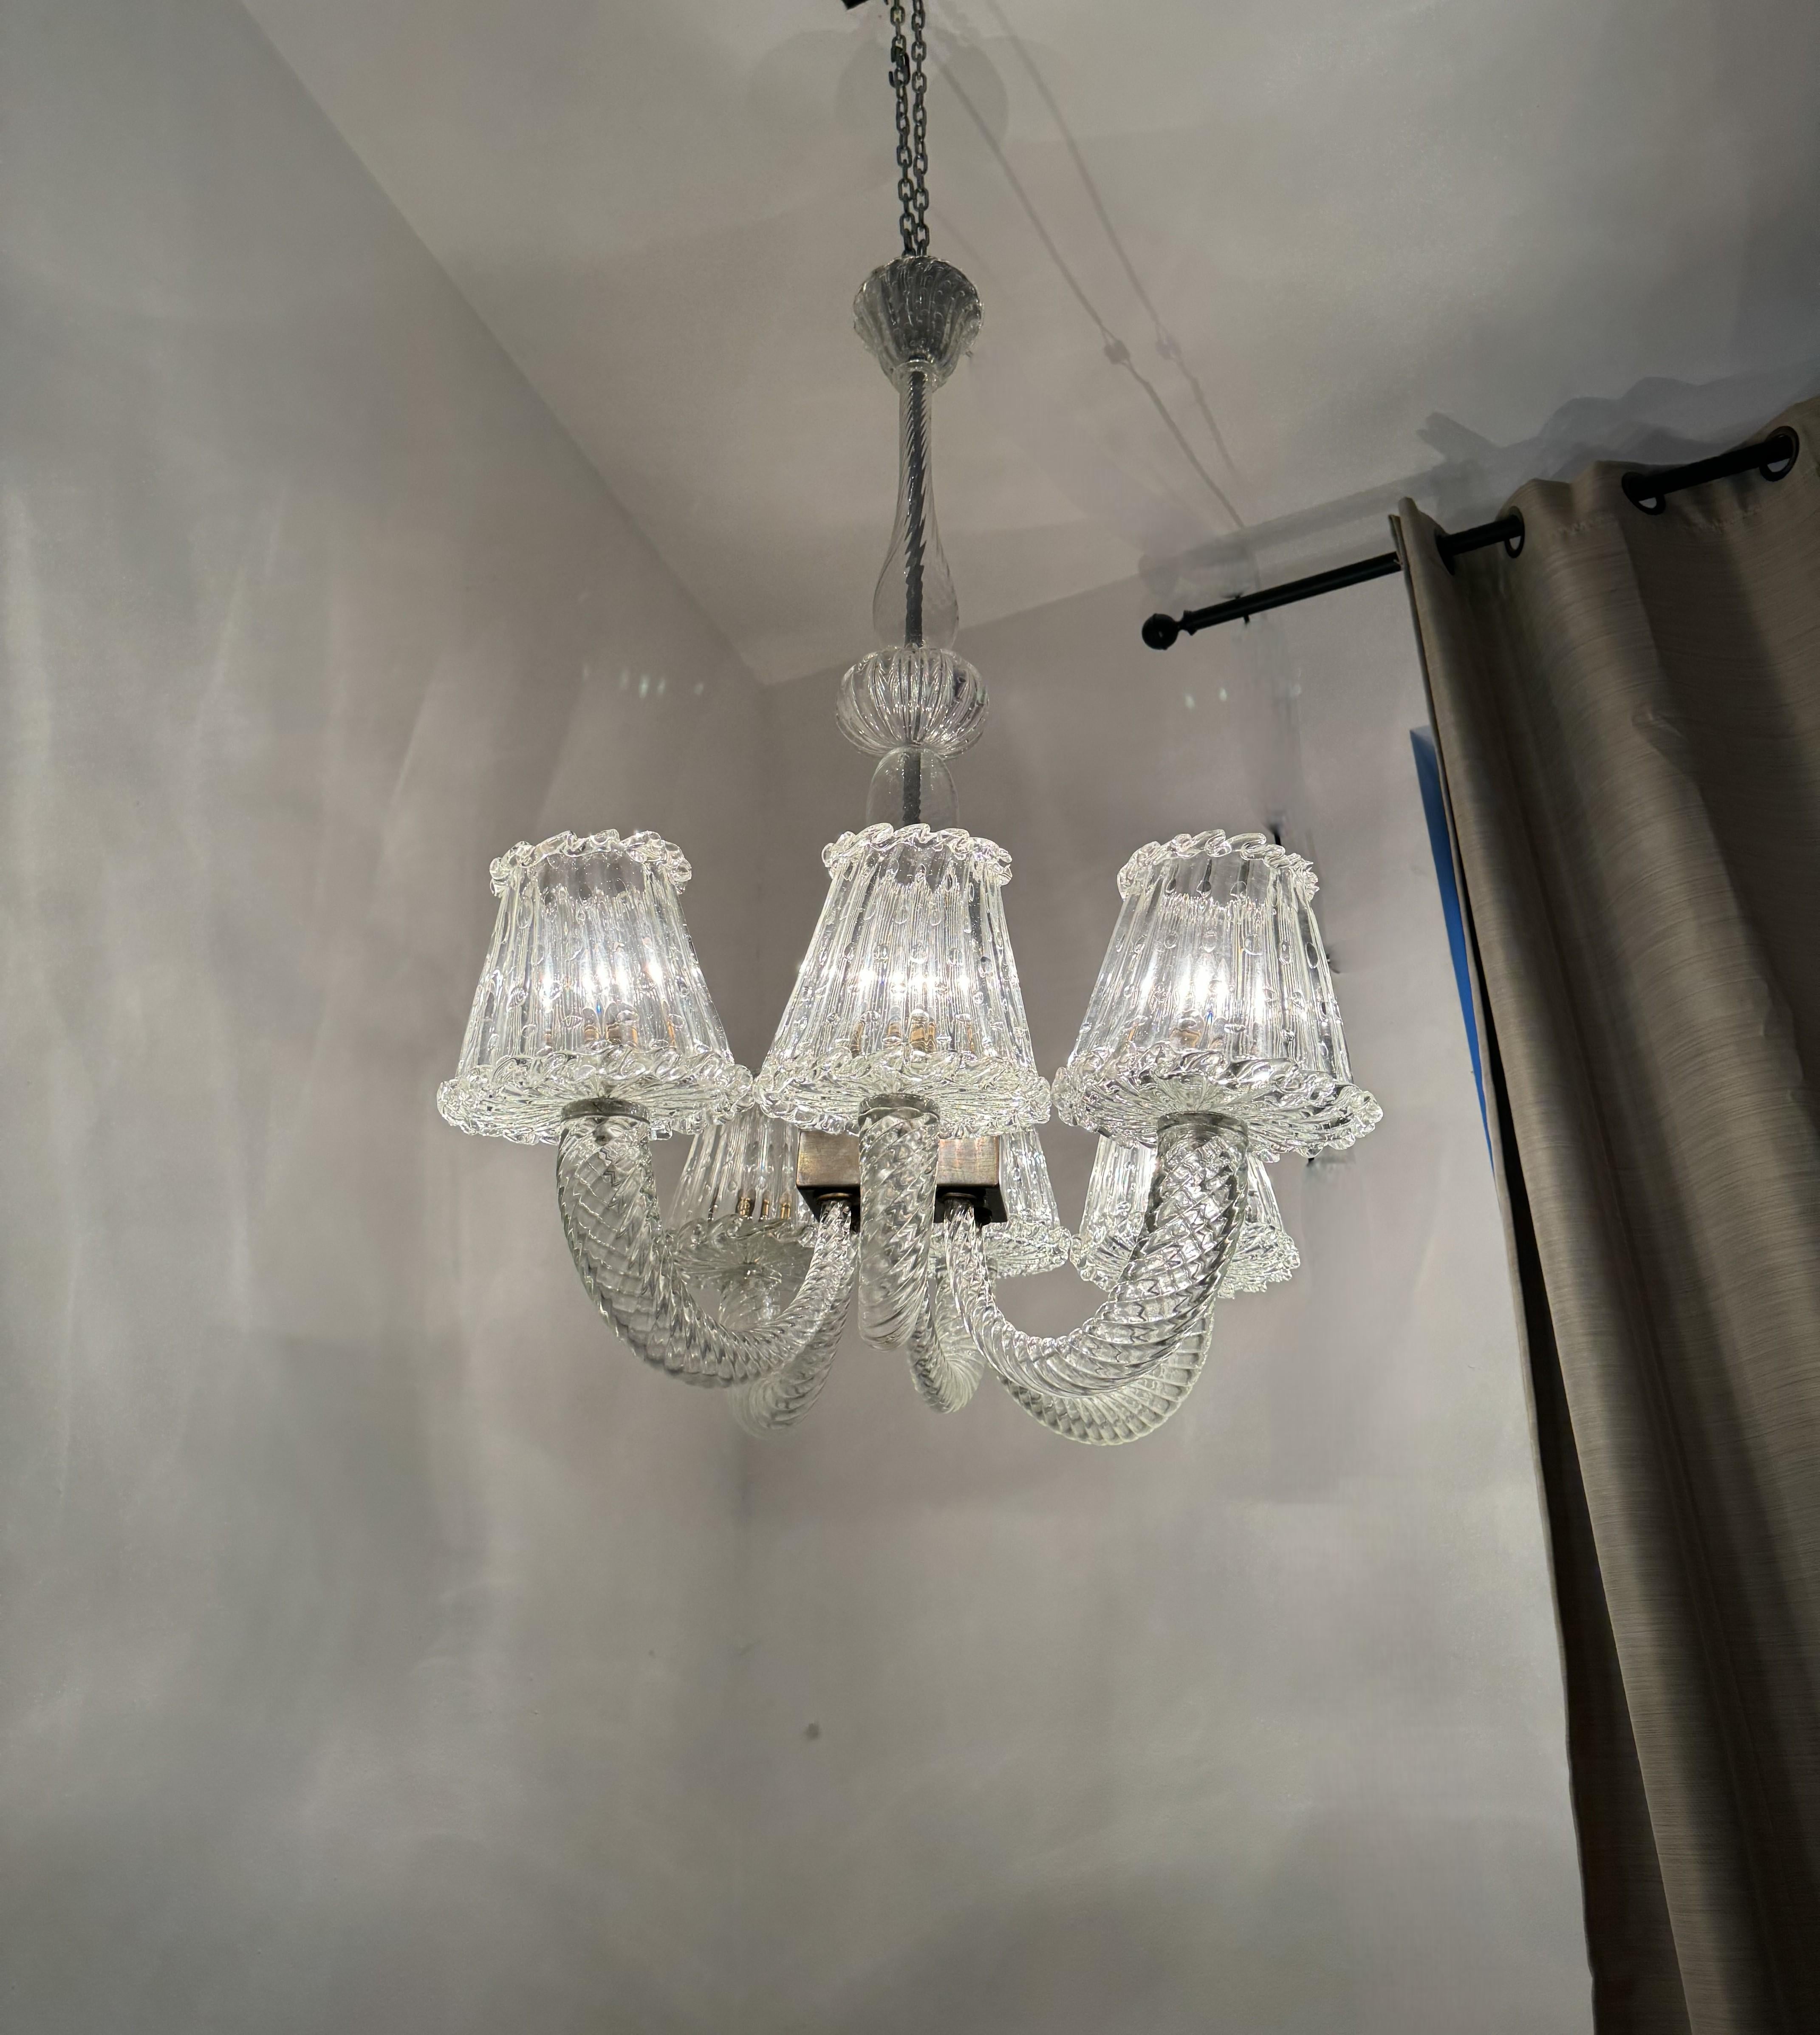 Art Deco Six Light Chandelier Attr. Barovier & Toso, Murano, Italy ca. 1930 For Sale 9